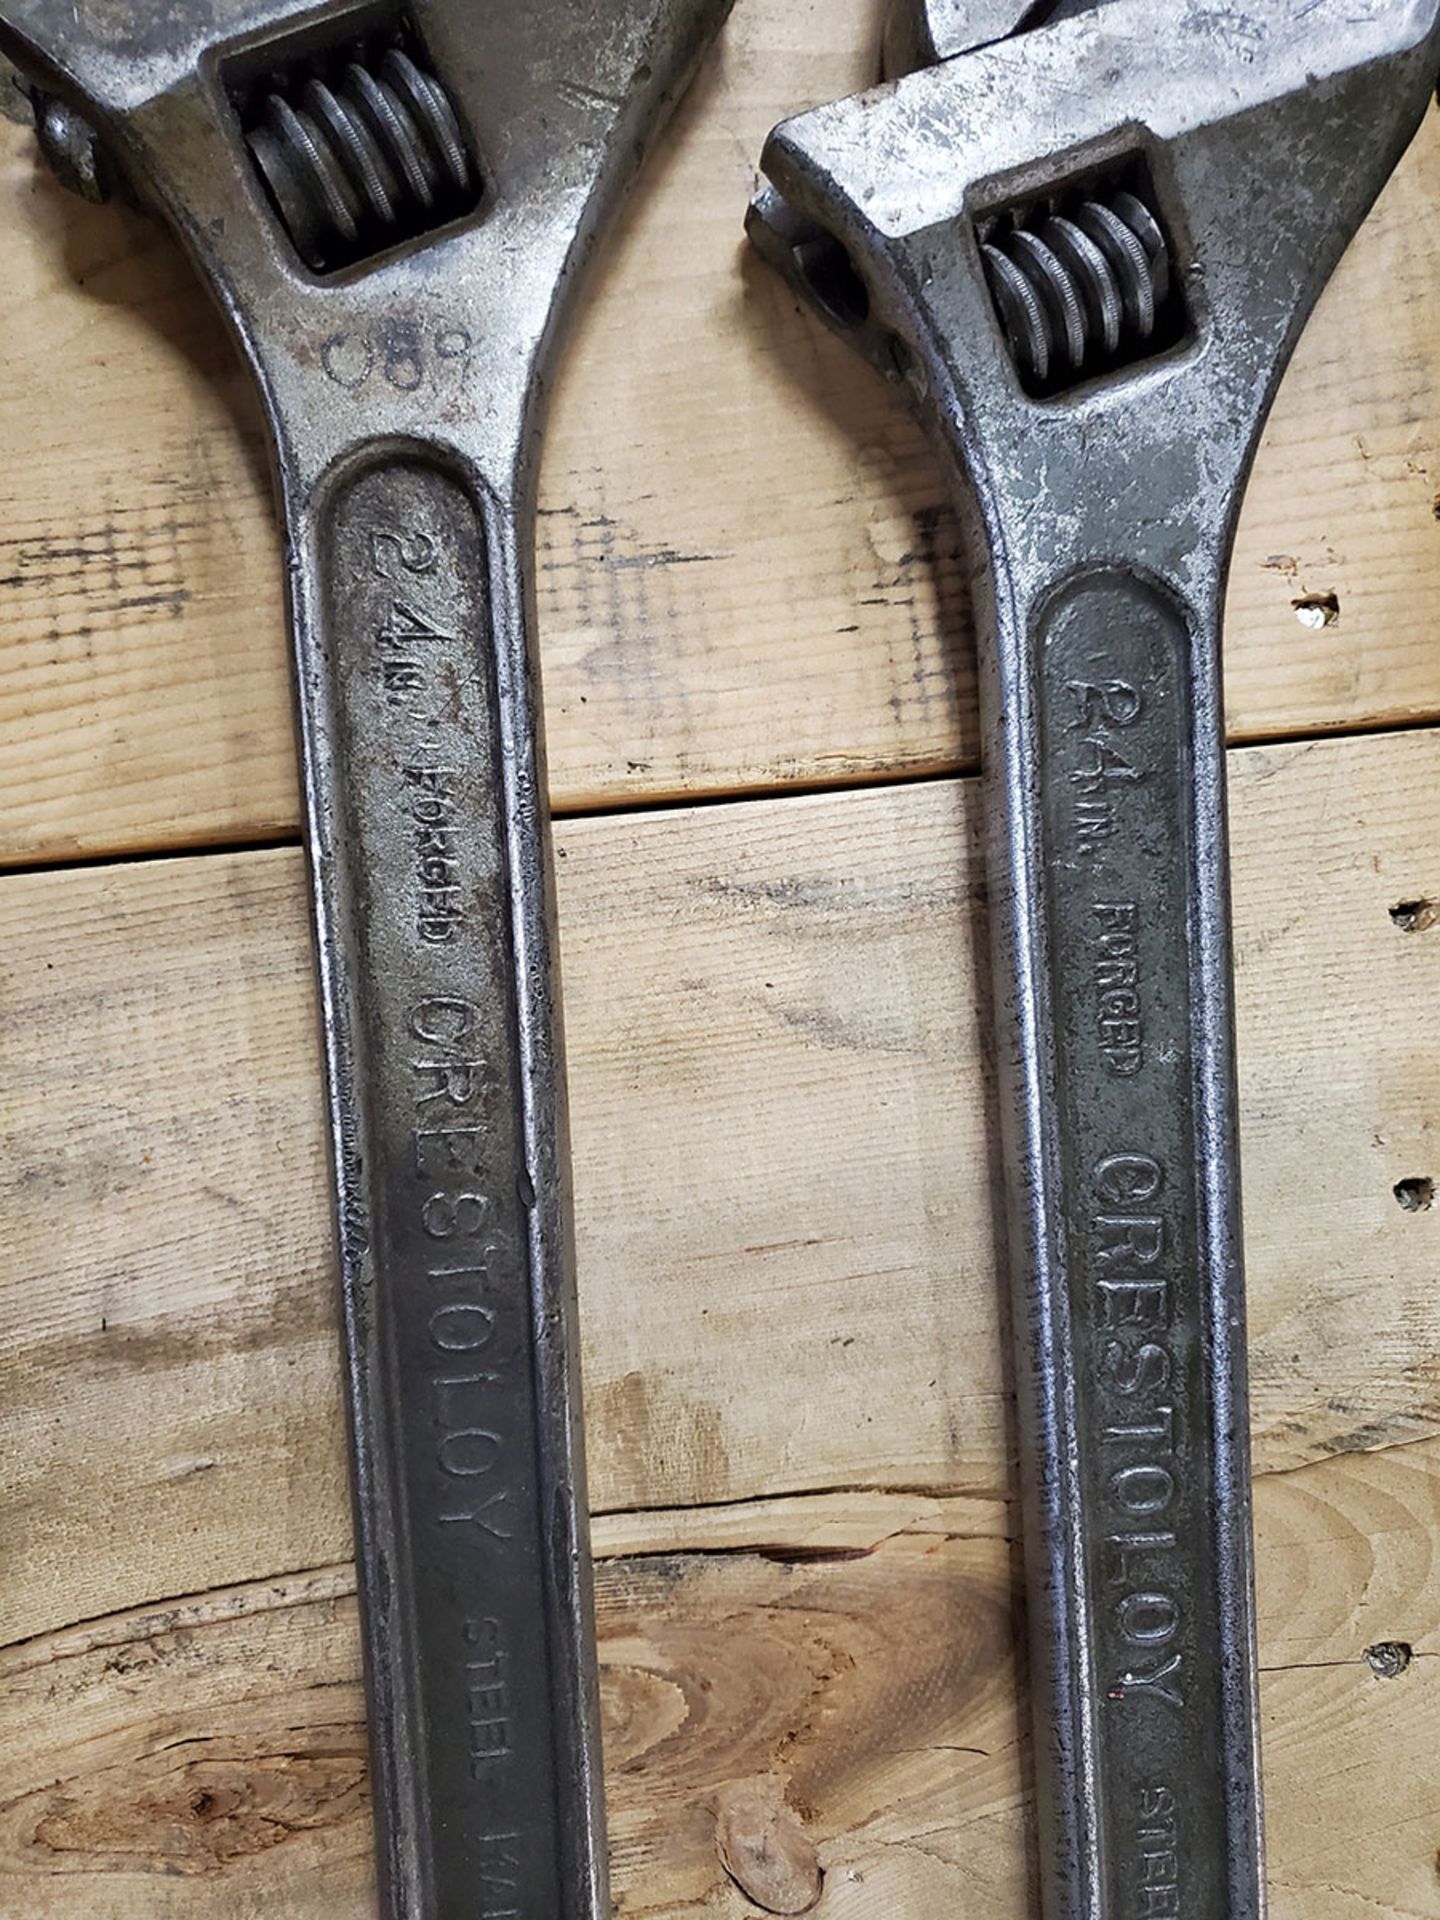 (3) BOXES OF 24’’ CREATOLOGY CRESCENT WRENCH, ALLEN WRENCHES, RUBBER MALLETS, OPEN/CLOSED END - Image 8 of 10